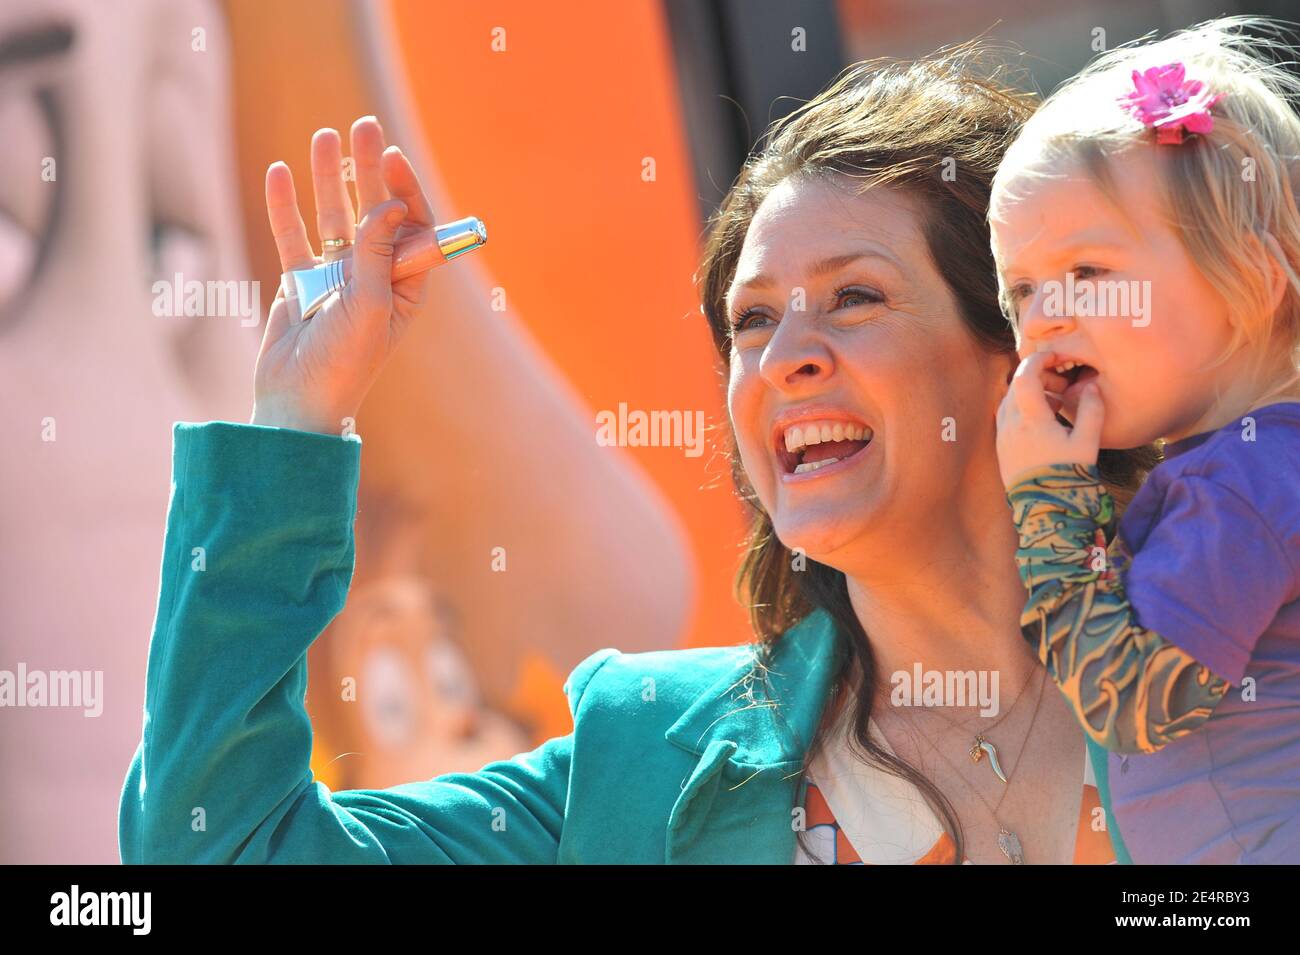 Joely Fisher and daughter attend the premiere of 'Dr. Seuss Horton Hears A Who!' at The Mann Village Theater in Westwood, Los Angeles, CA, USA on March 8, 2008. Photo by Lionel Hahn/ABACAPRESS.COM Stock Photo